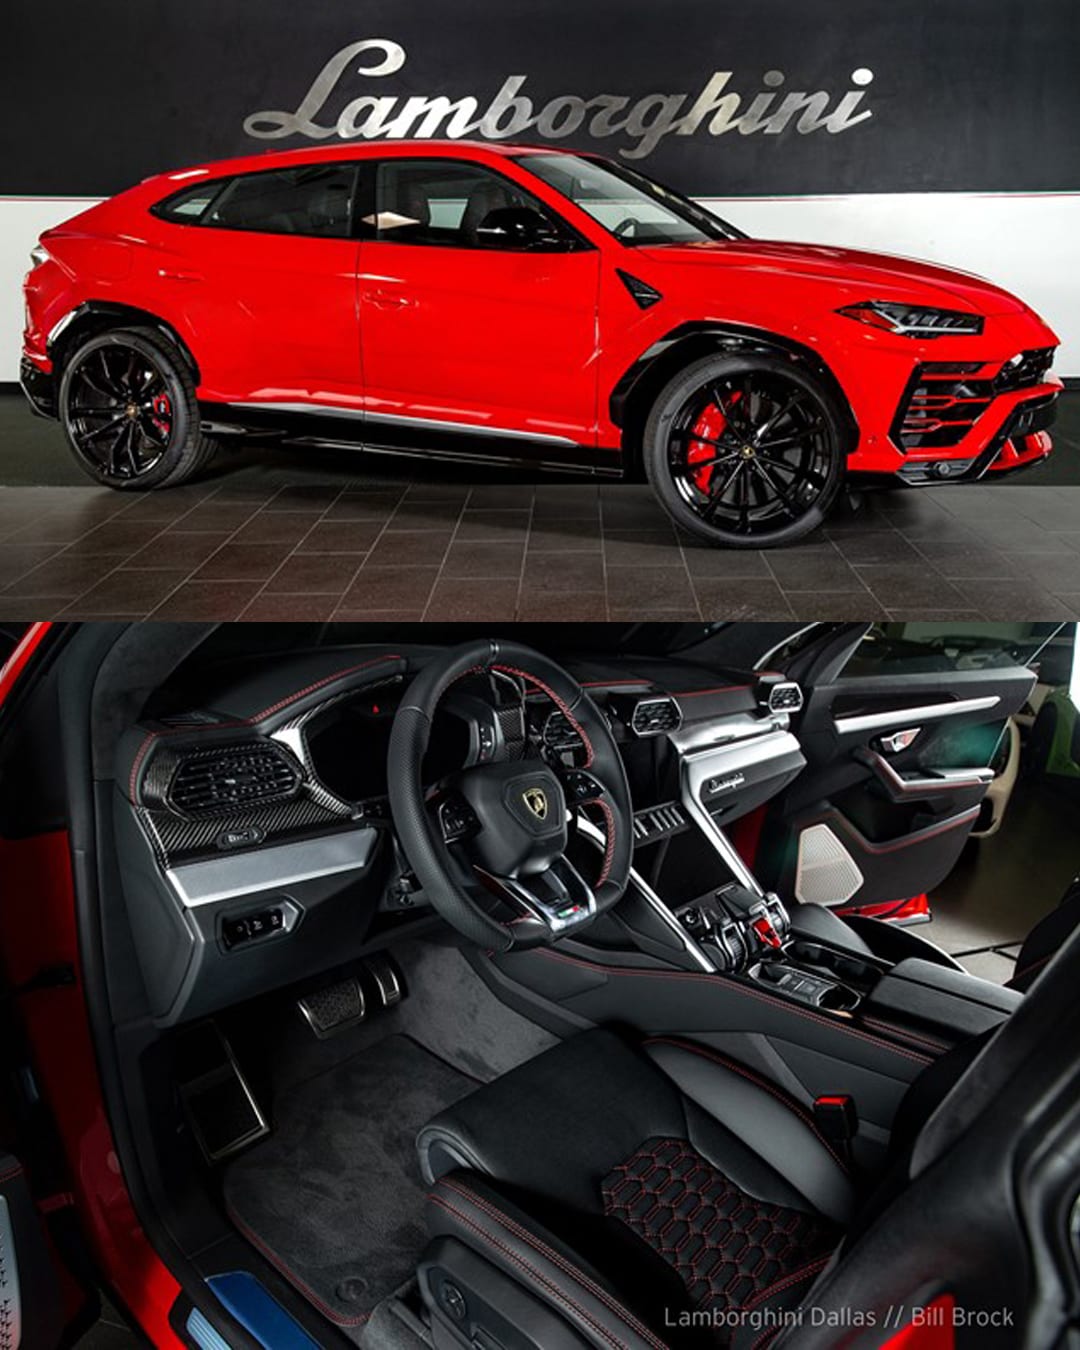 This Lamborghini Urus is the right color for many enthusiasts. 